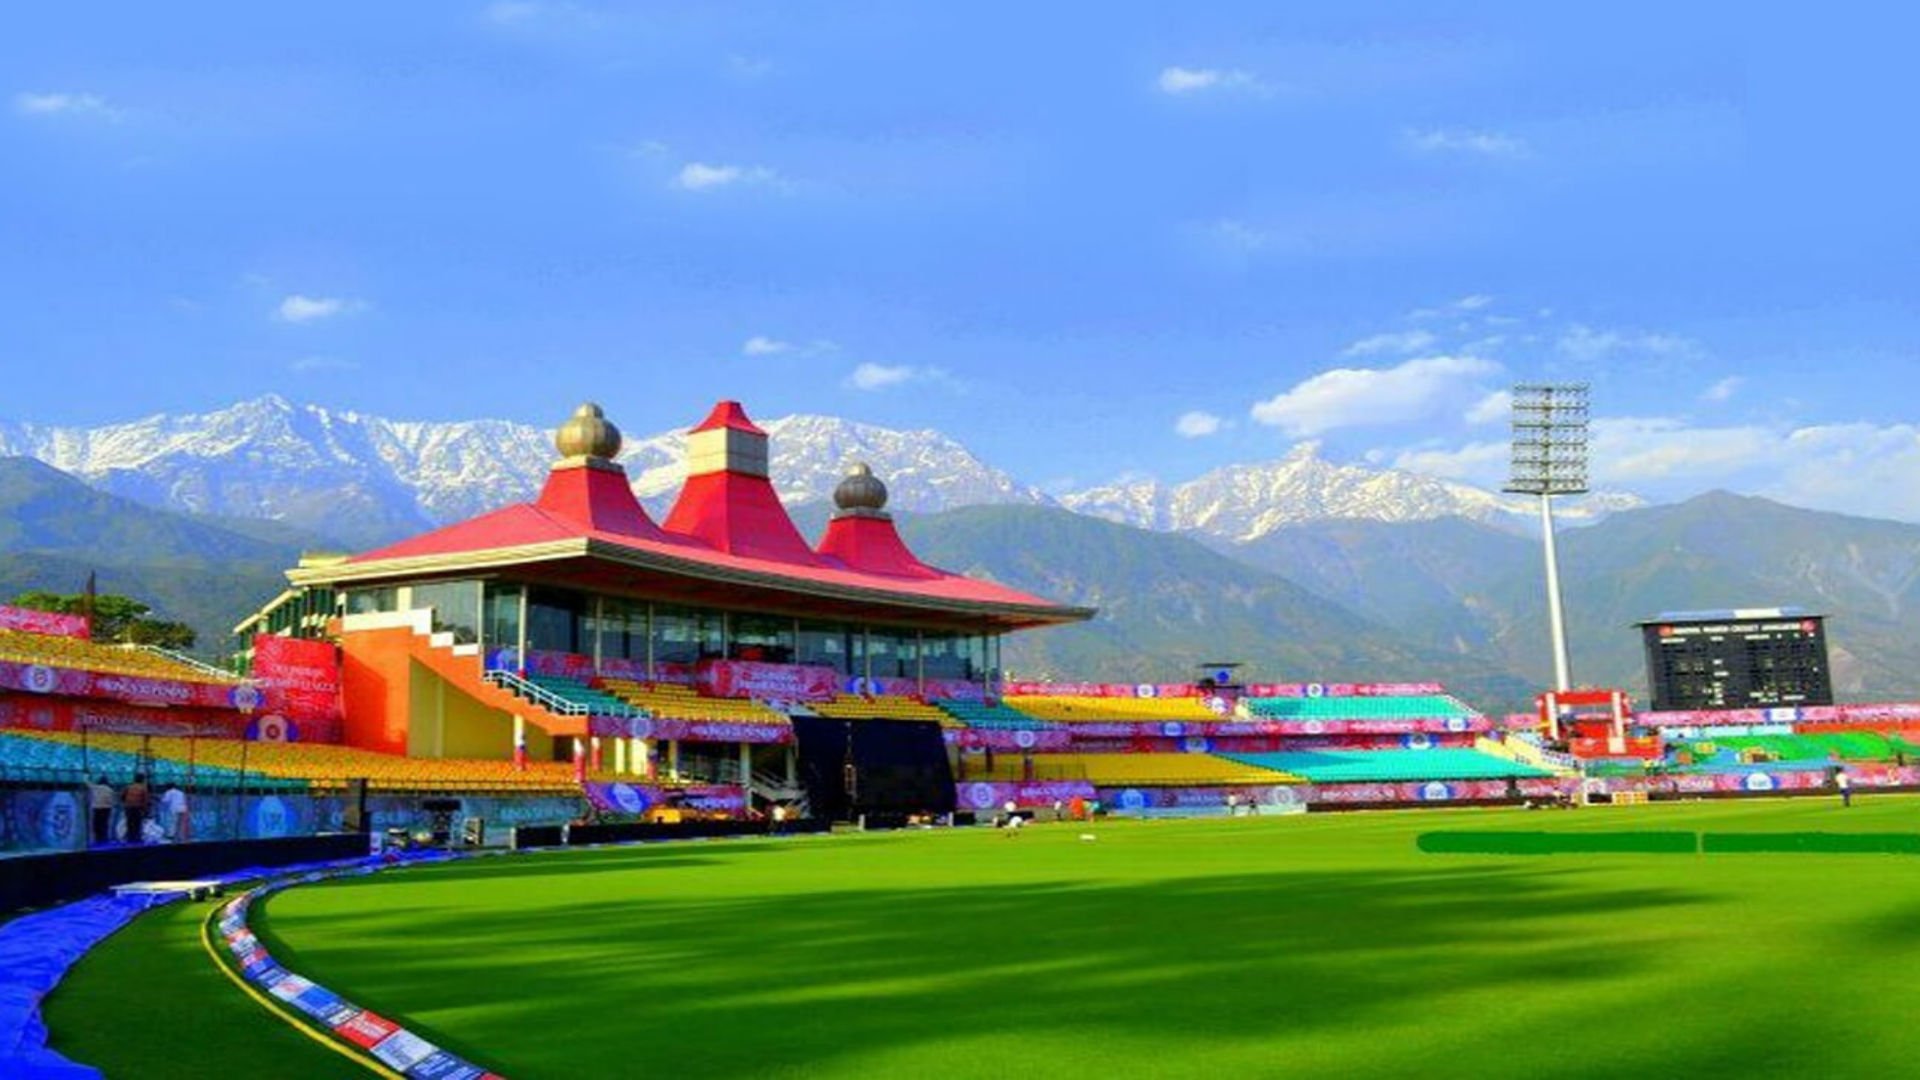 dharamshala tour packages from delhi